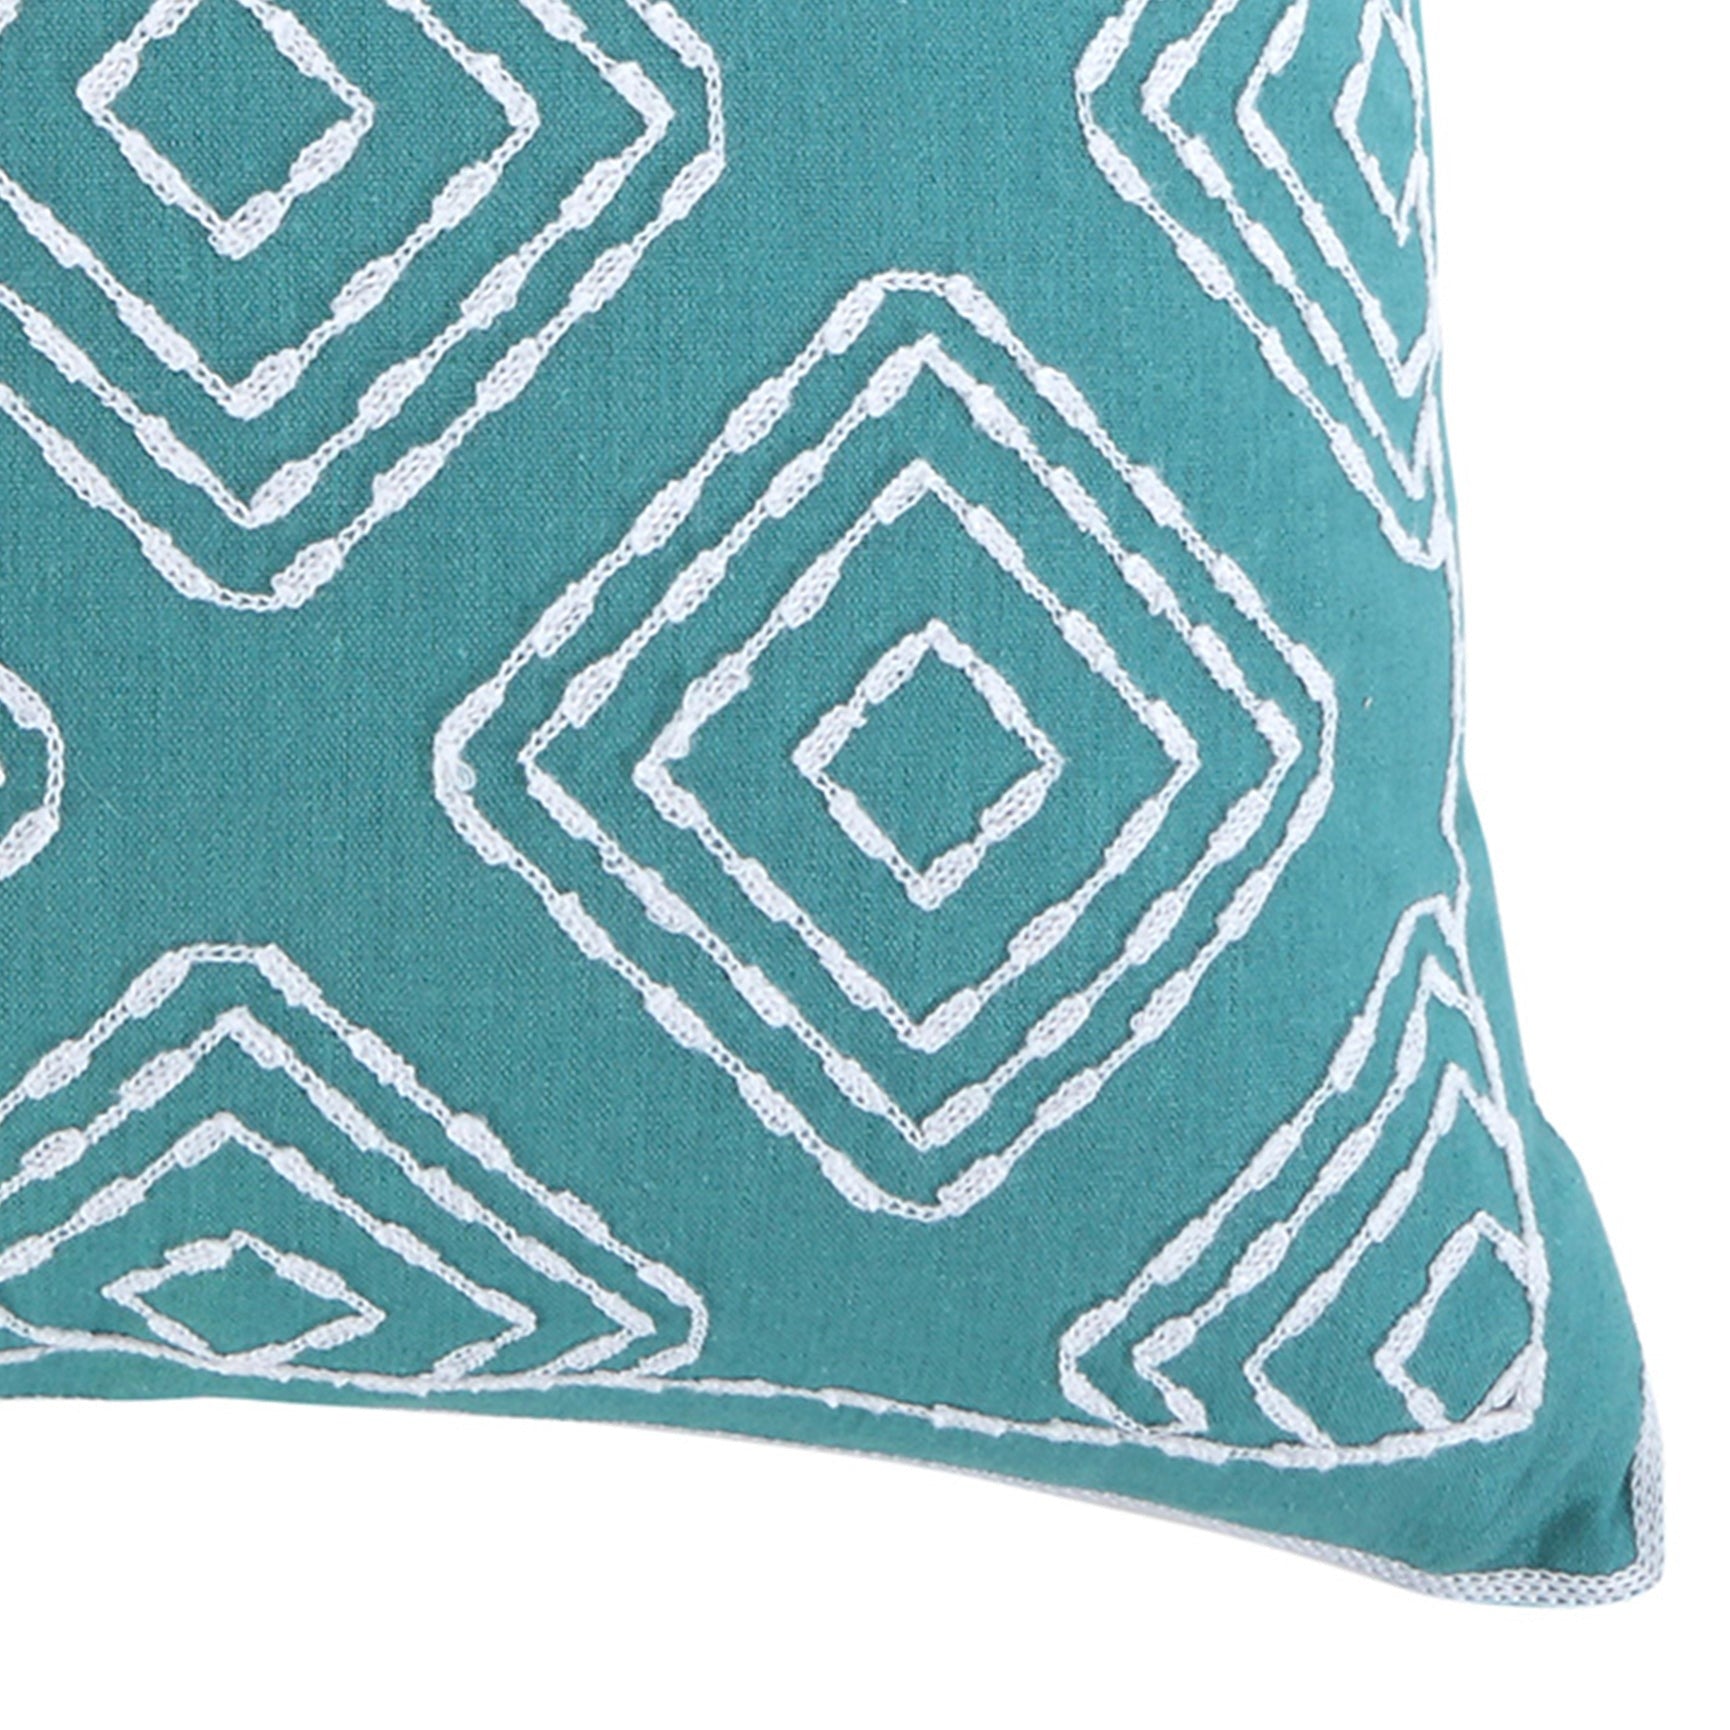 Del Ray Teal Crewel Stitch Pillow